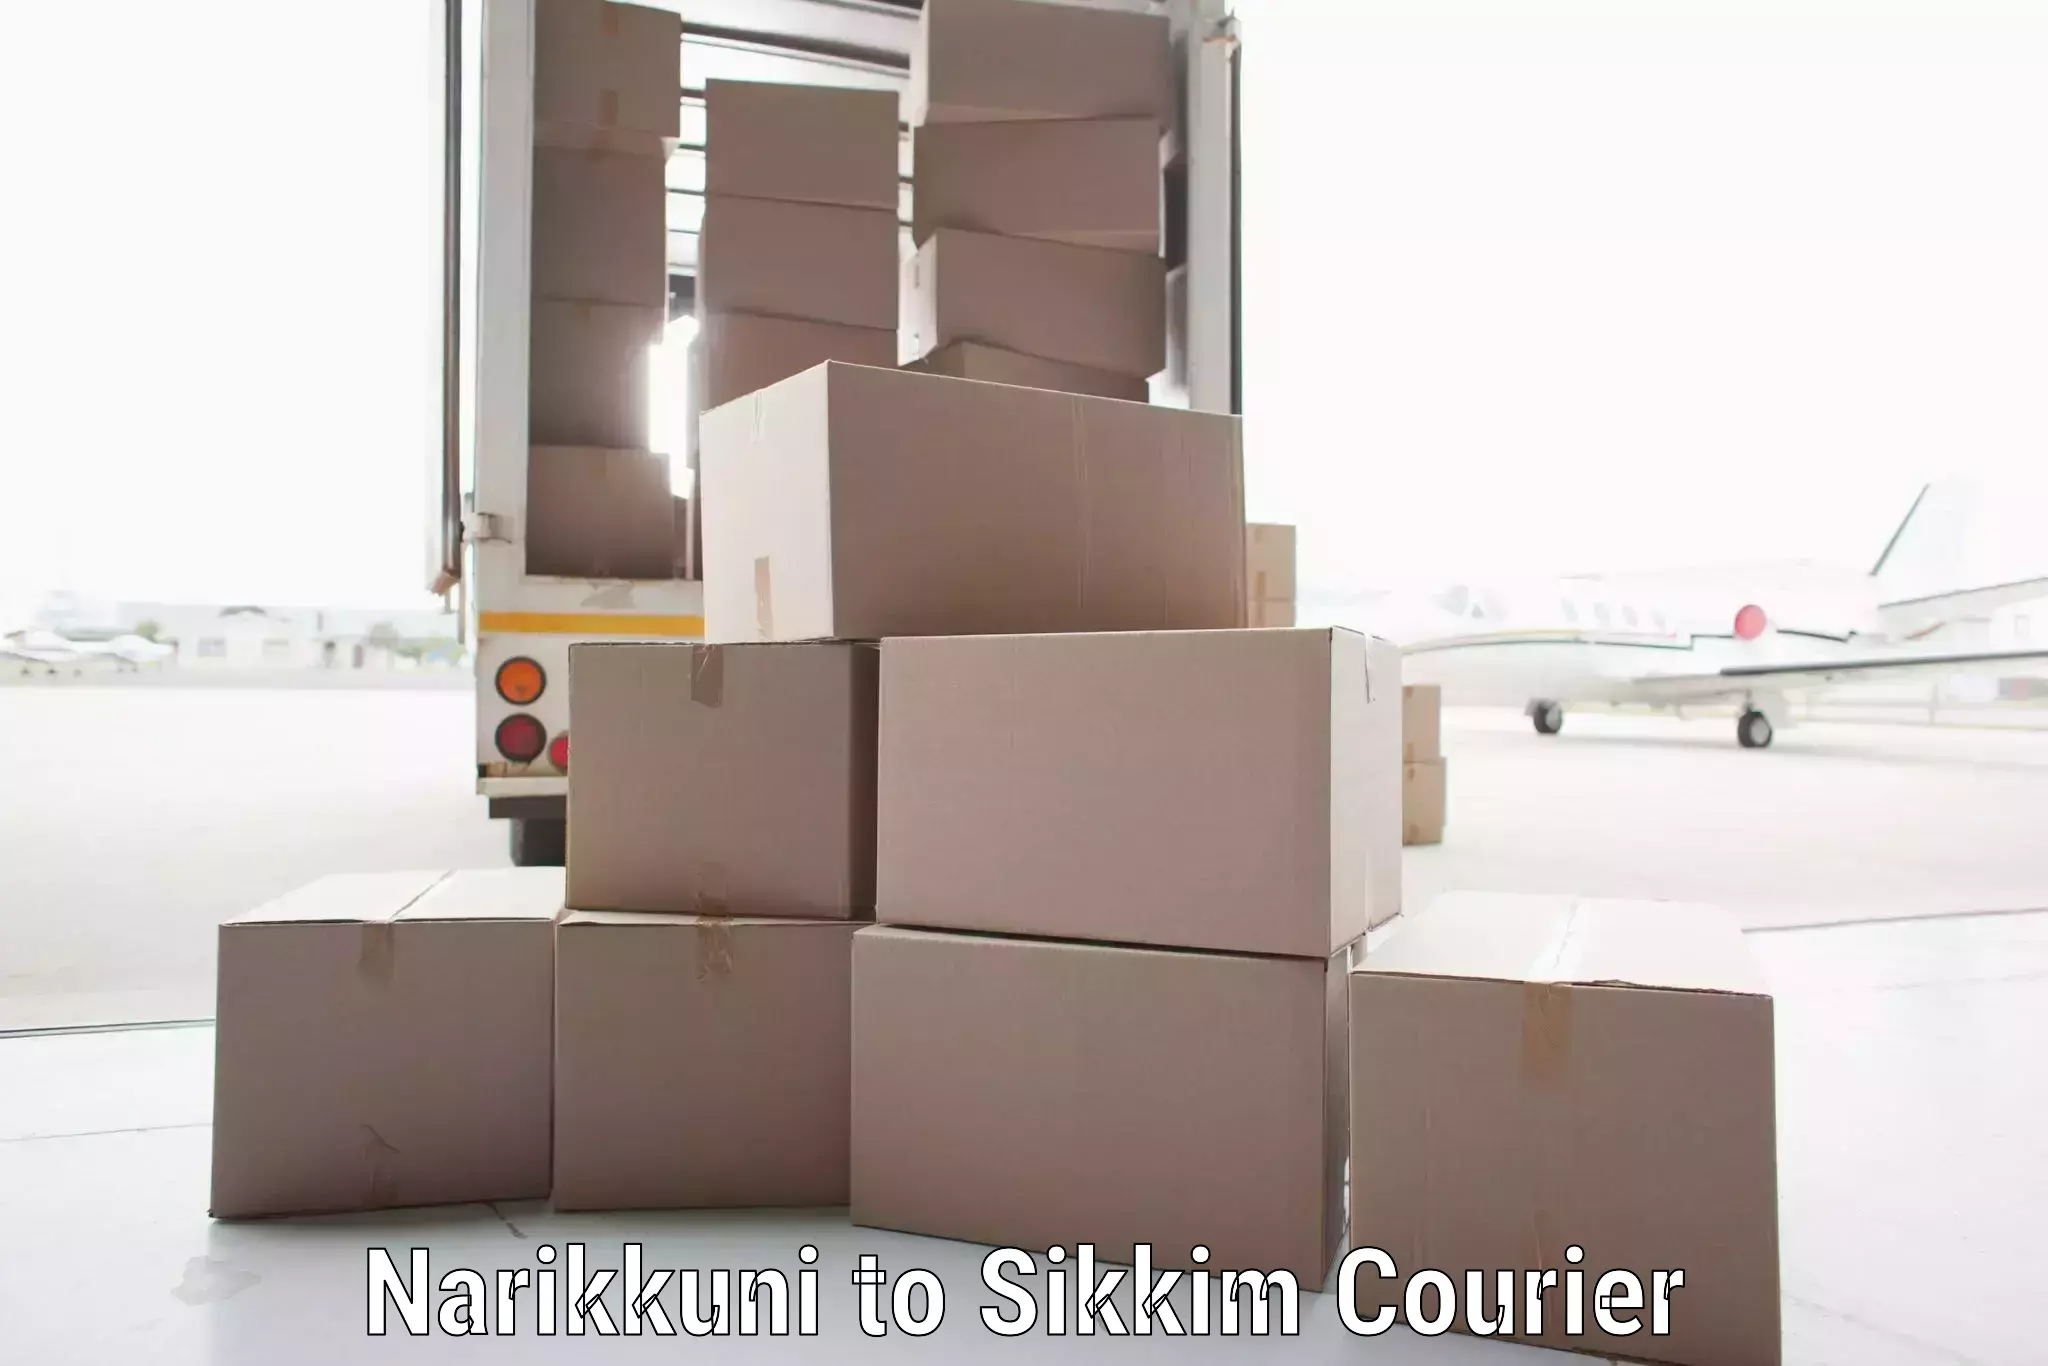 Express delivery solutions Narikkuni to Namchi